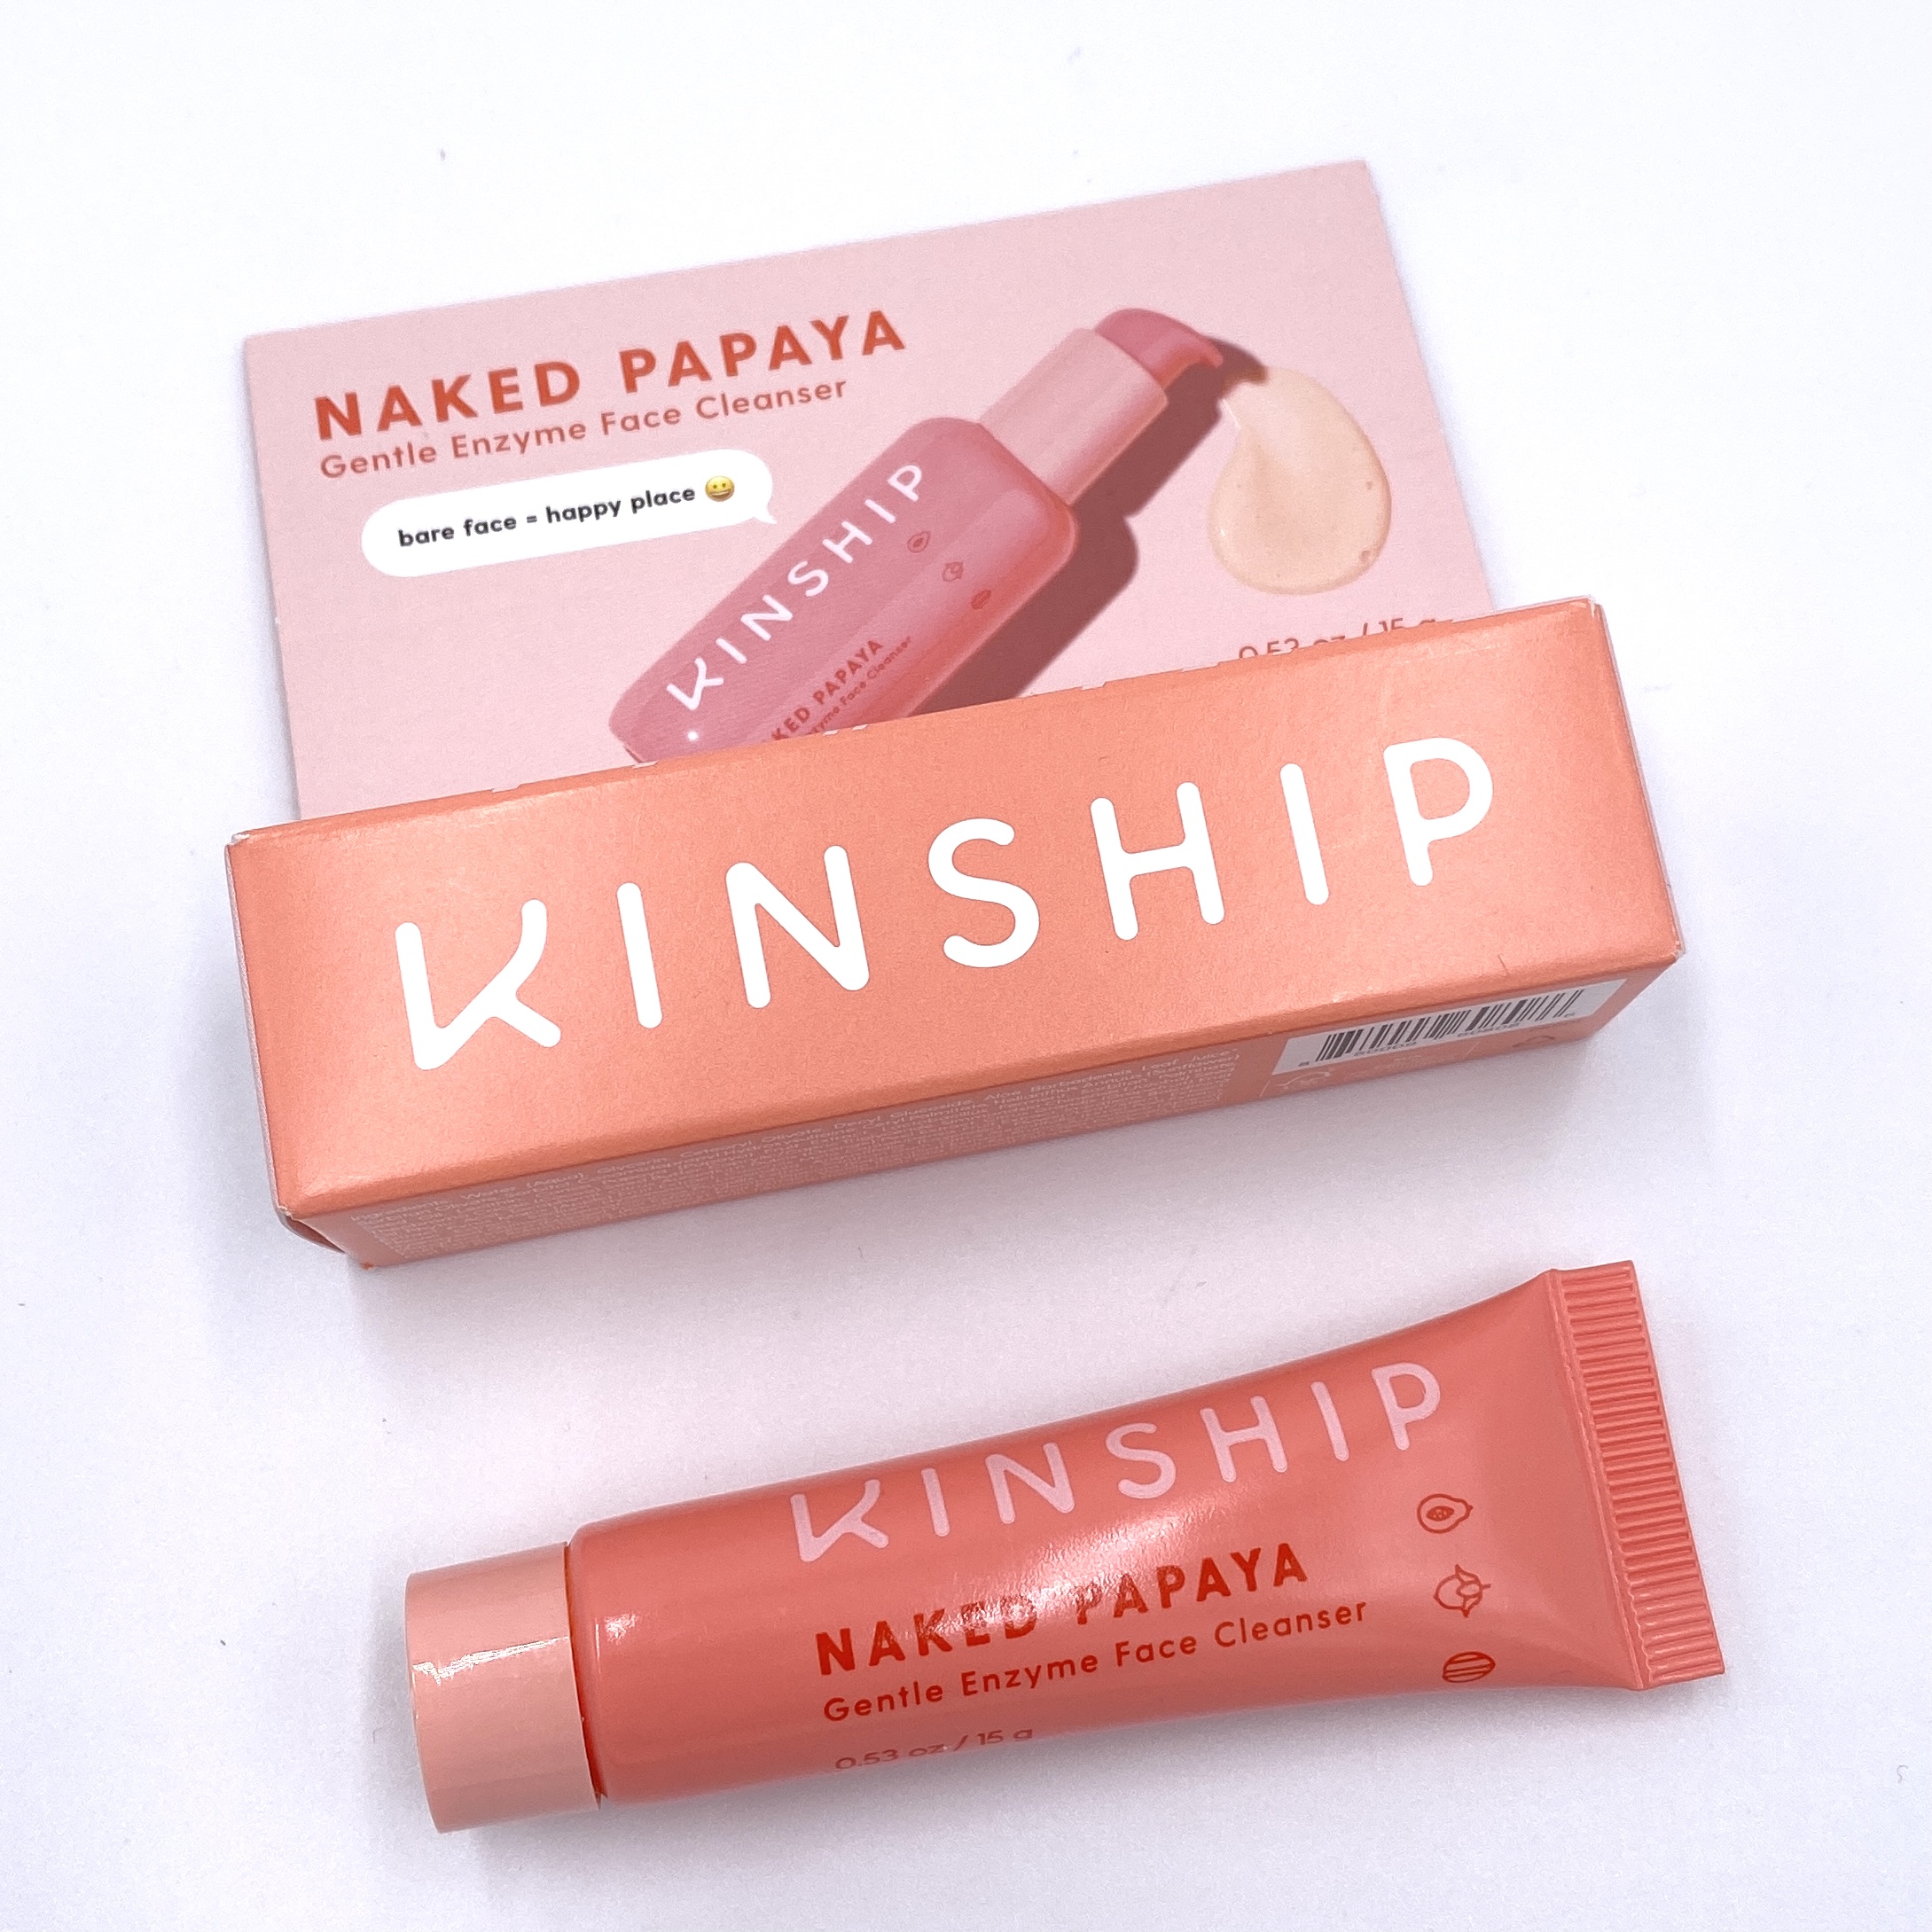 Kinship Naked Papaya Gentle Enzyme Face Cleanser Box Front for Ipsy Glam Bag January 2021